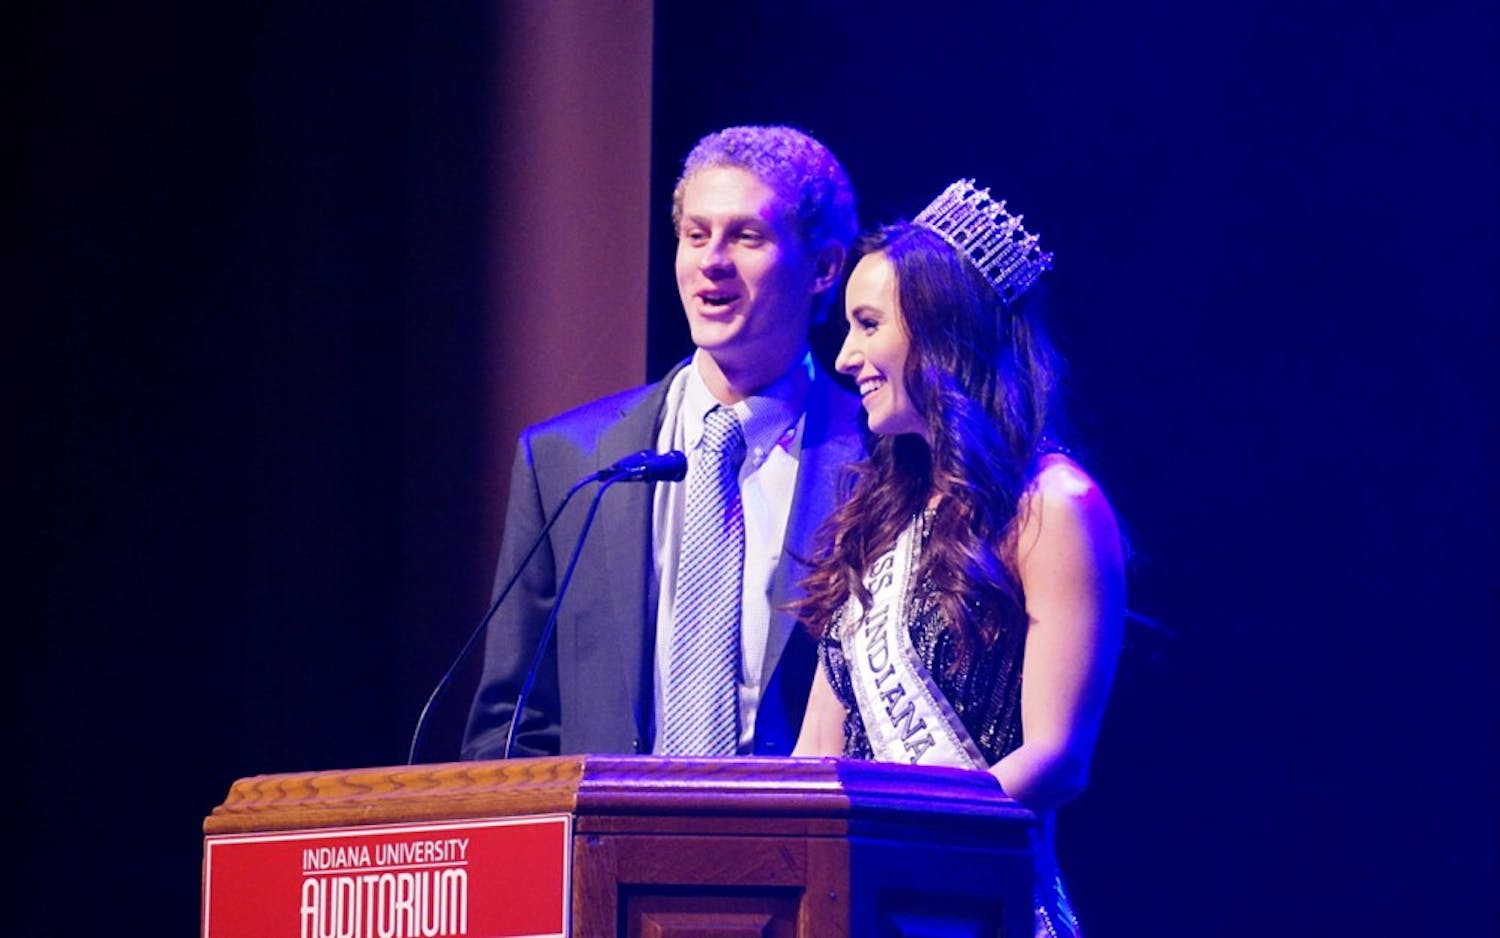 Masters of ceremonies&nbsp;Brittany Winchester&nbsp;and Adam Weber introduce this year's Miss Greek IU contestants. This event took place Sunday night in the IU Auditorium.